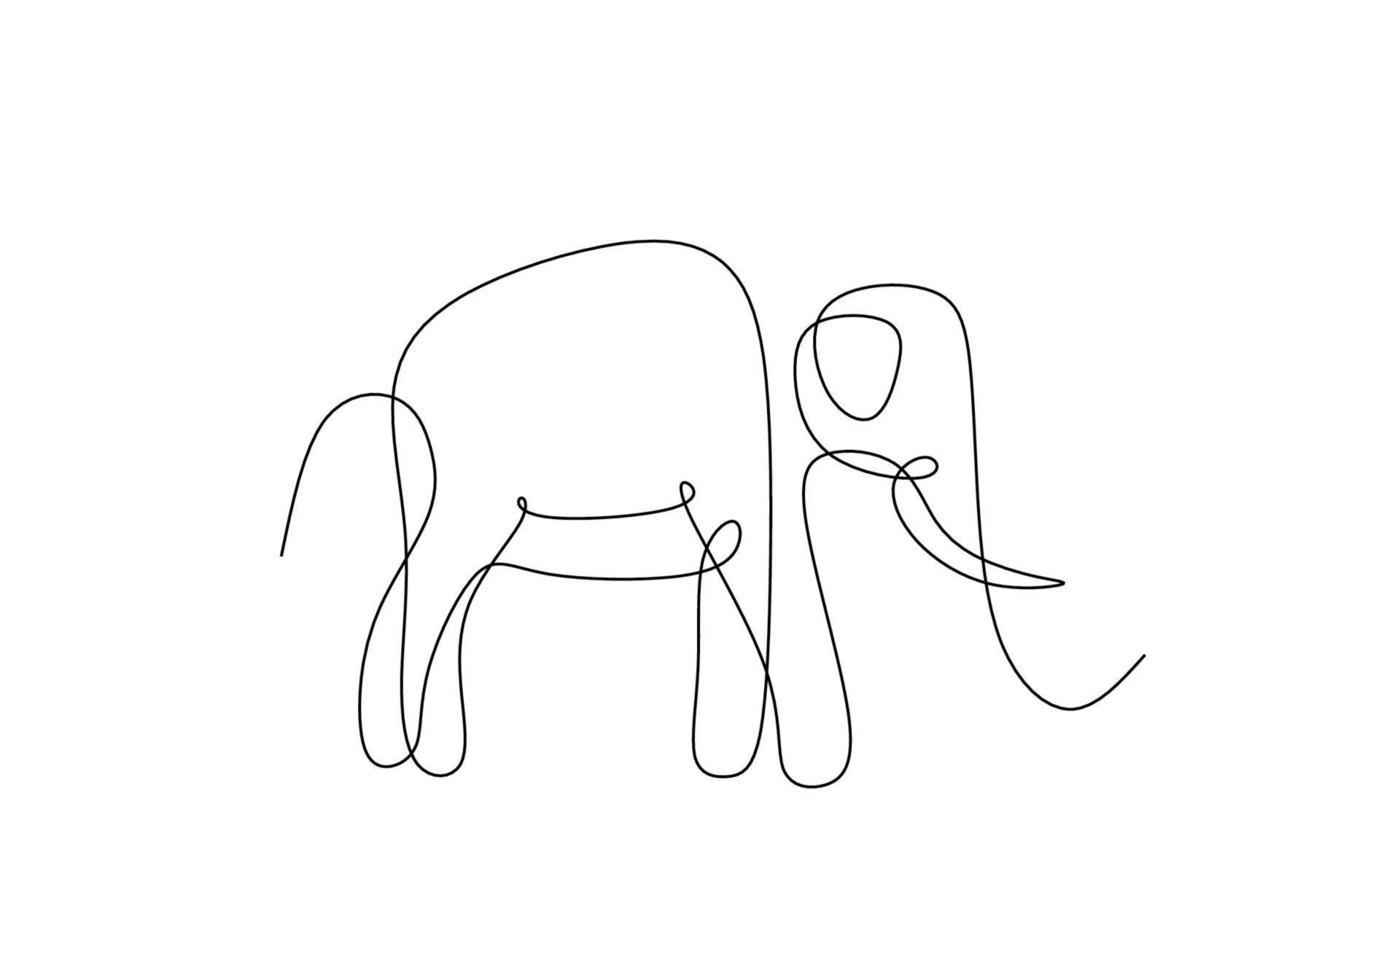 Continuous one line drawing of an elephant vector